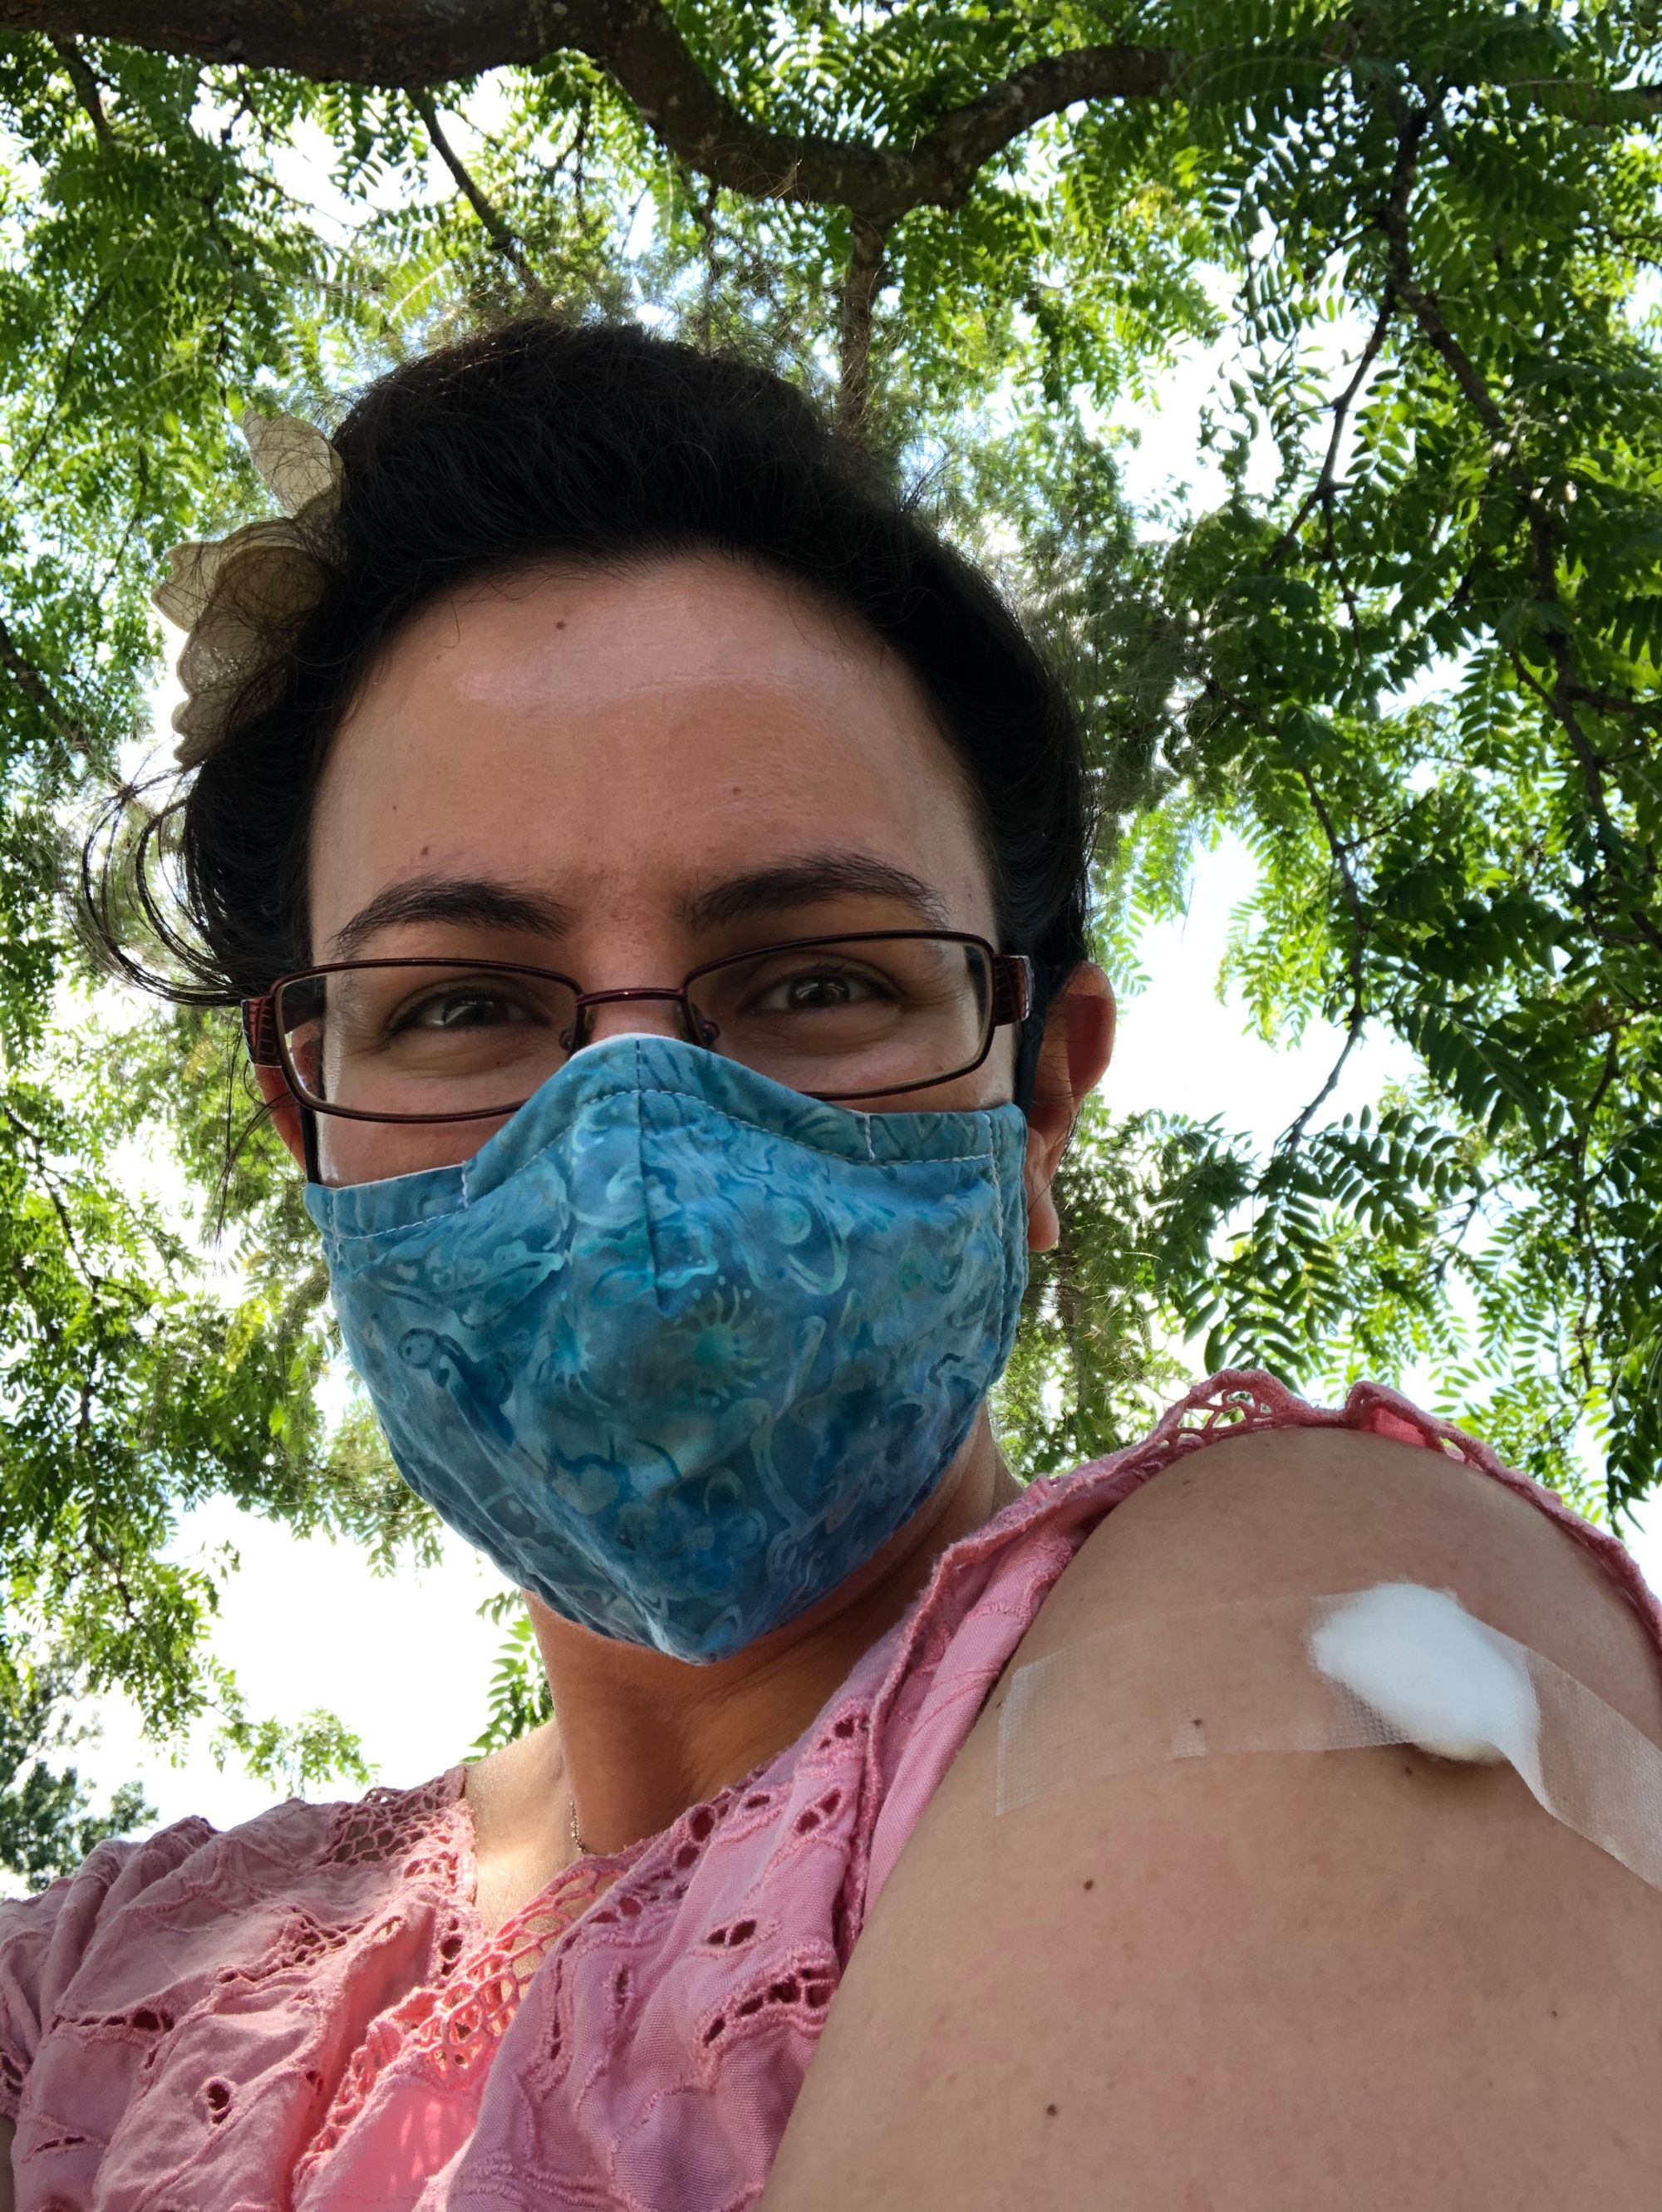 Close up selfie against a sunny backdrop of green leaves; I'm wearing rectangular glasses and a turquoise mask in a damask pattern and a pink lacy shirt, showing off the taped cottonball over my vaccinated shoulder.